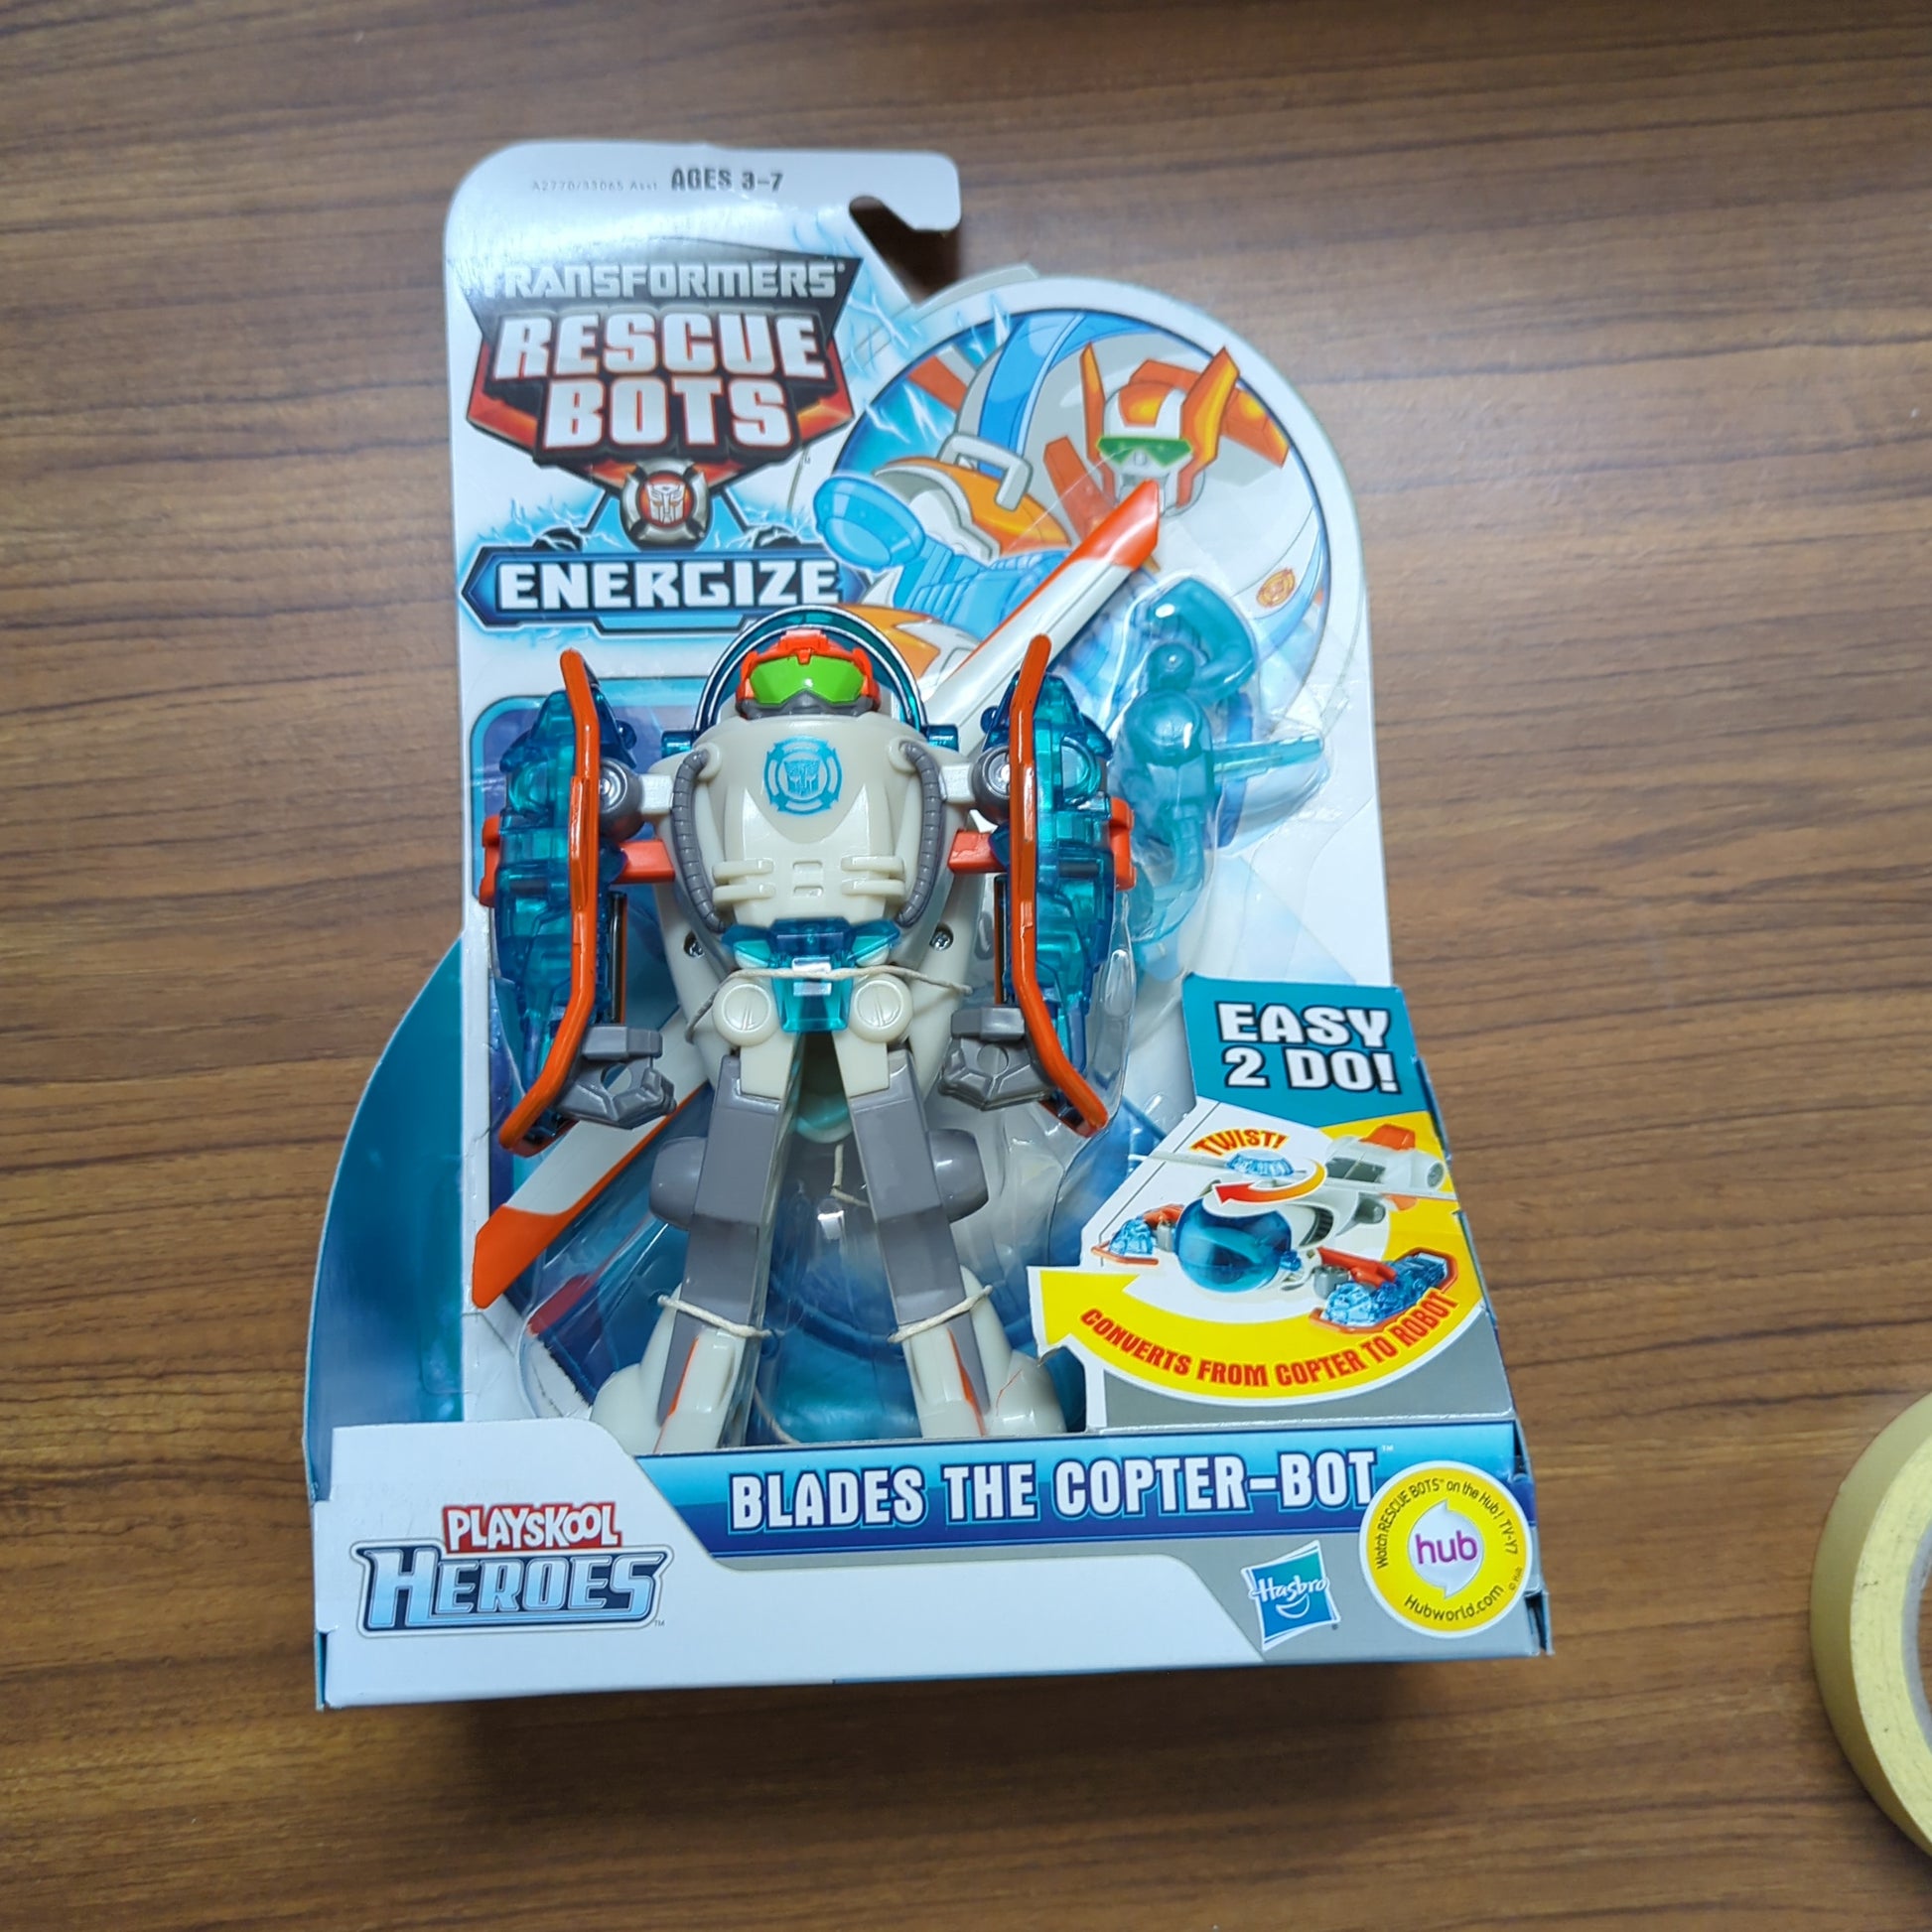 Hasbro Transformers Rescue Bots Playskool Heroes- Blades The Copter-Bot FRENLY BRICKS - Open 7 Days